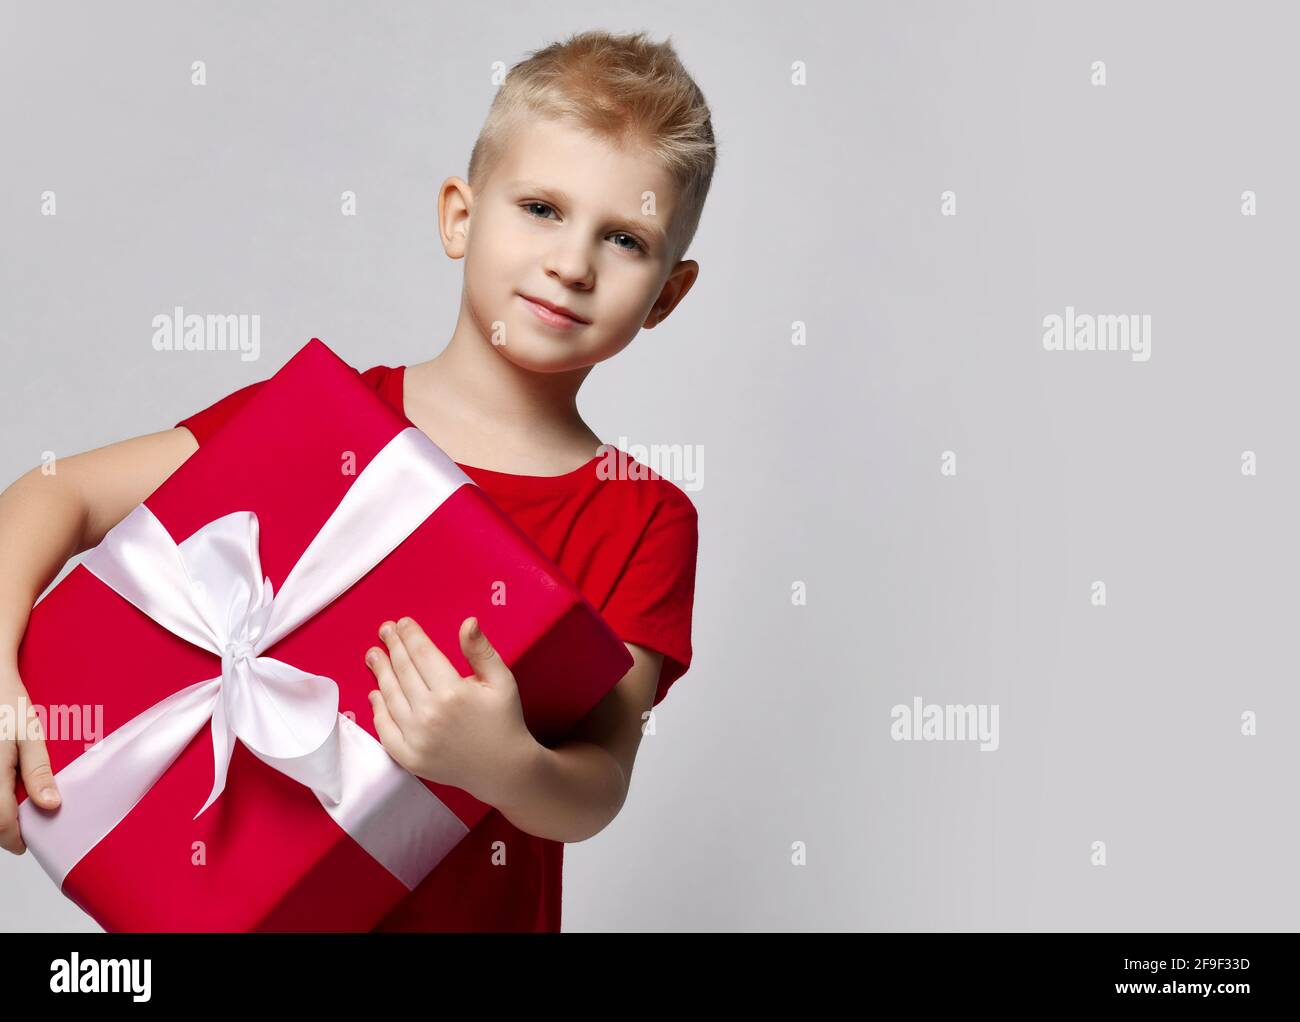 Stylish cheerful boy child in red t-shirt holding big present box with ribbon in hands looking at camera Stock Photo